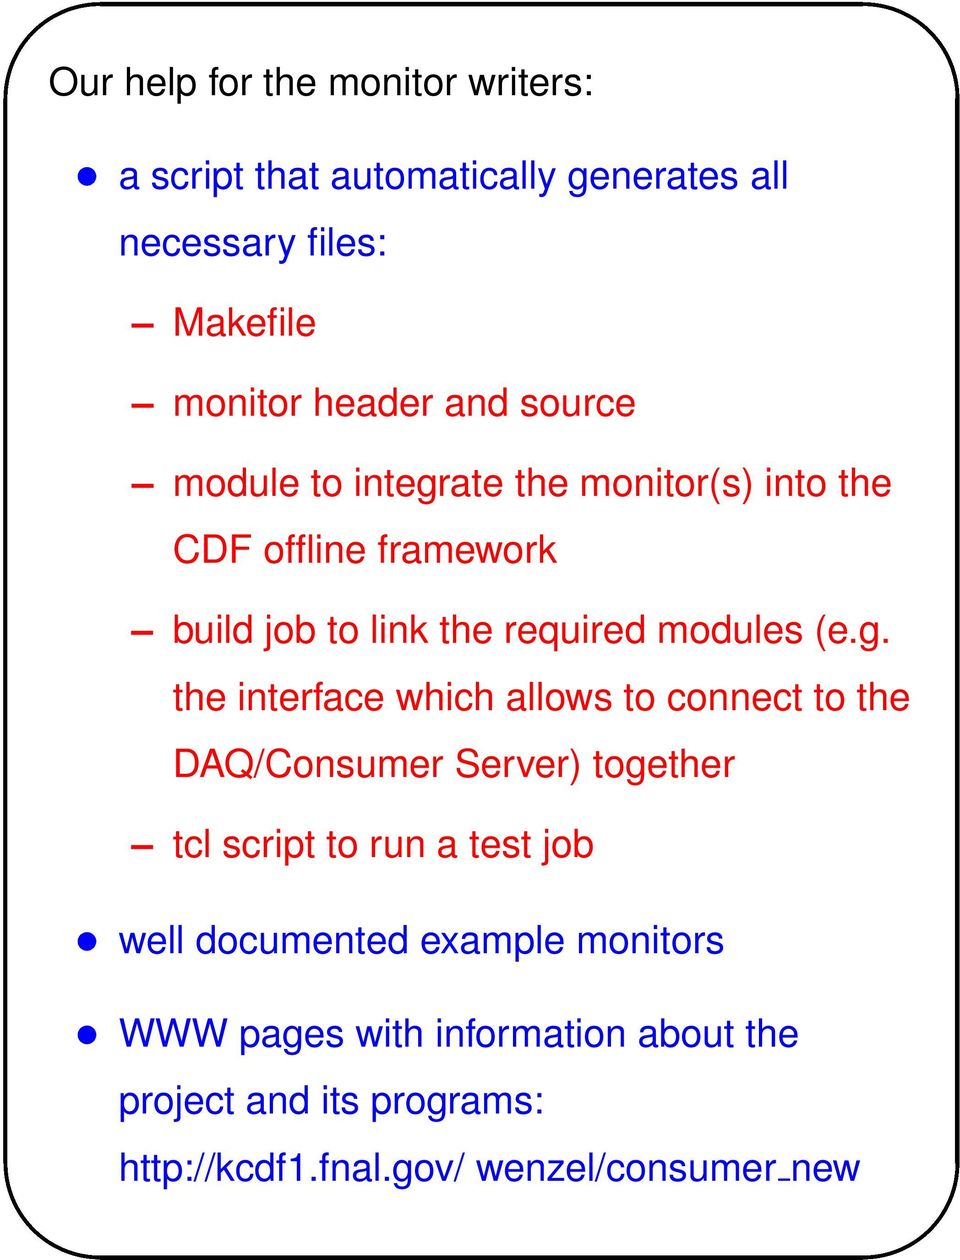 ate the monitor(s) into the CDF offline framework build job to link the required modules (e.g.